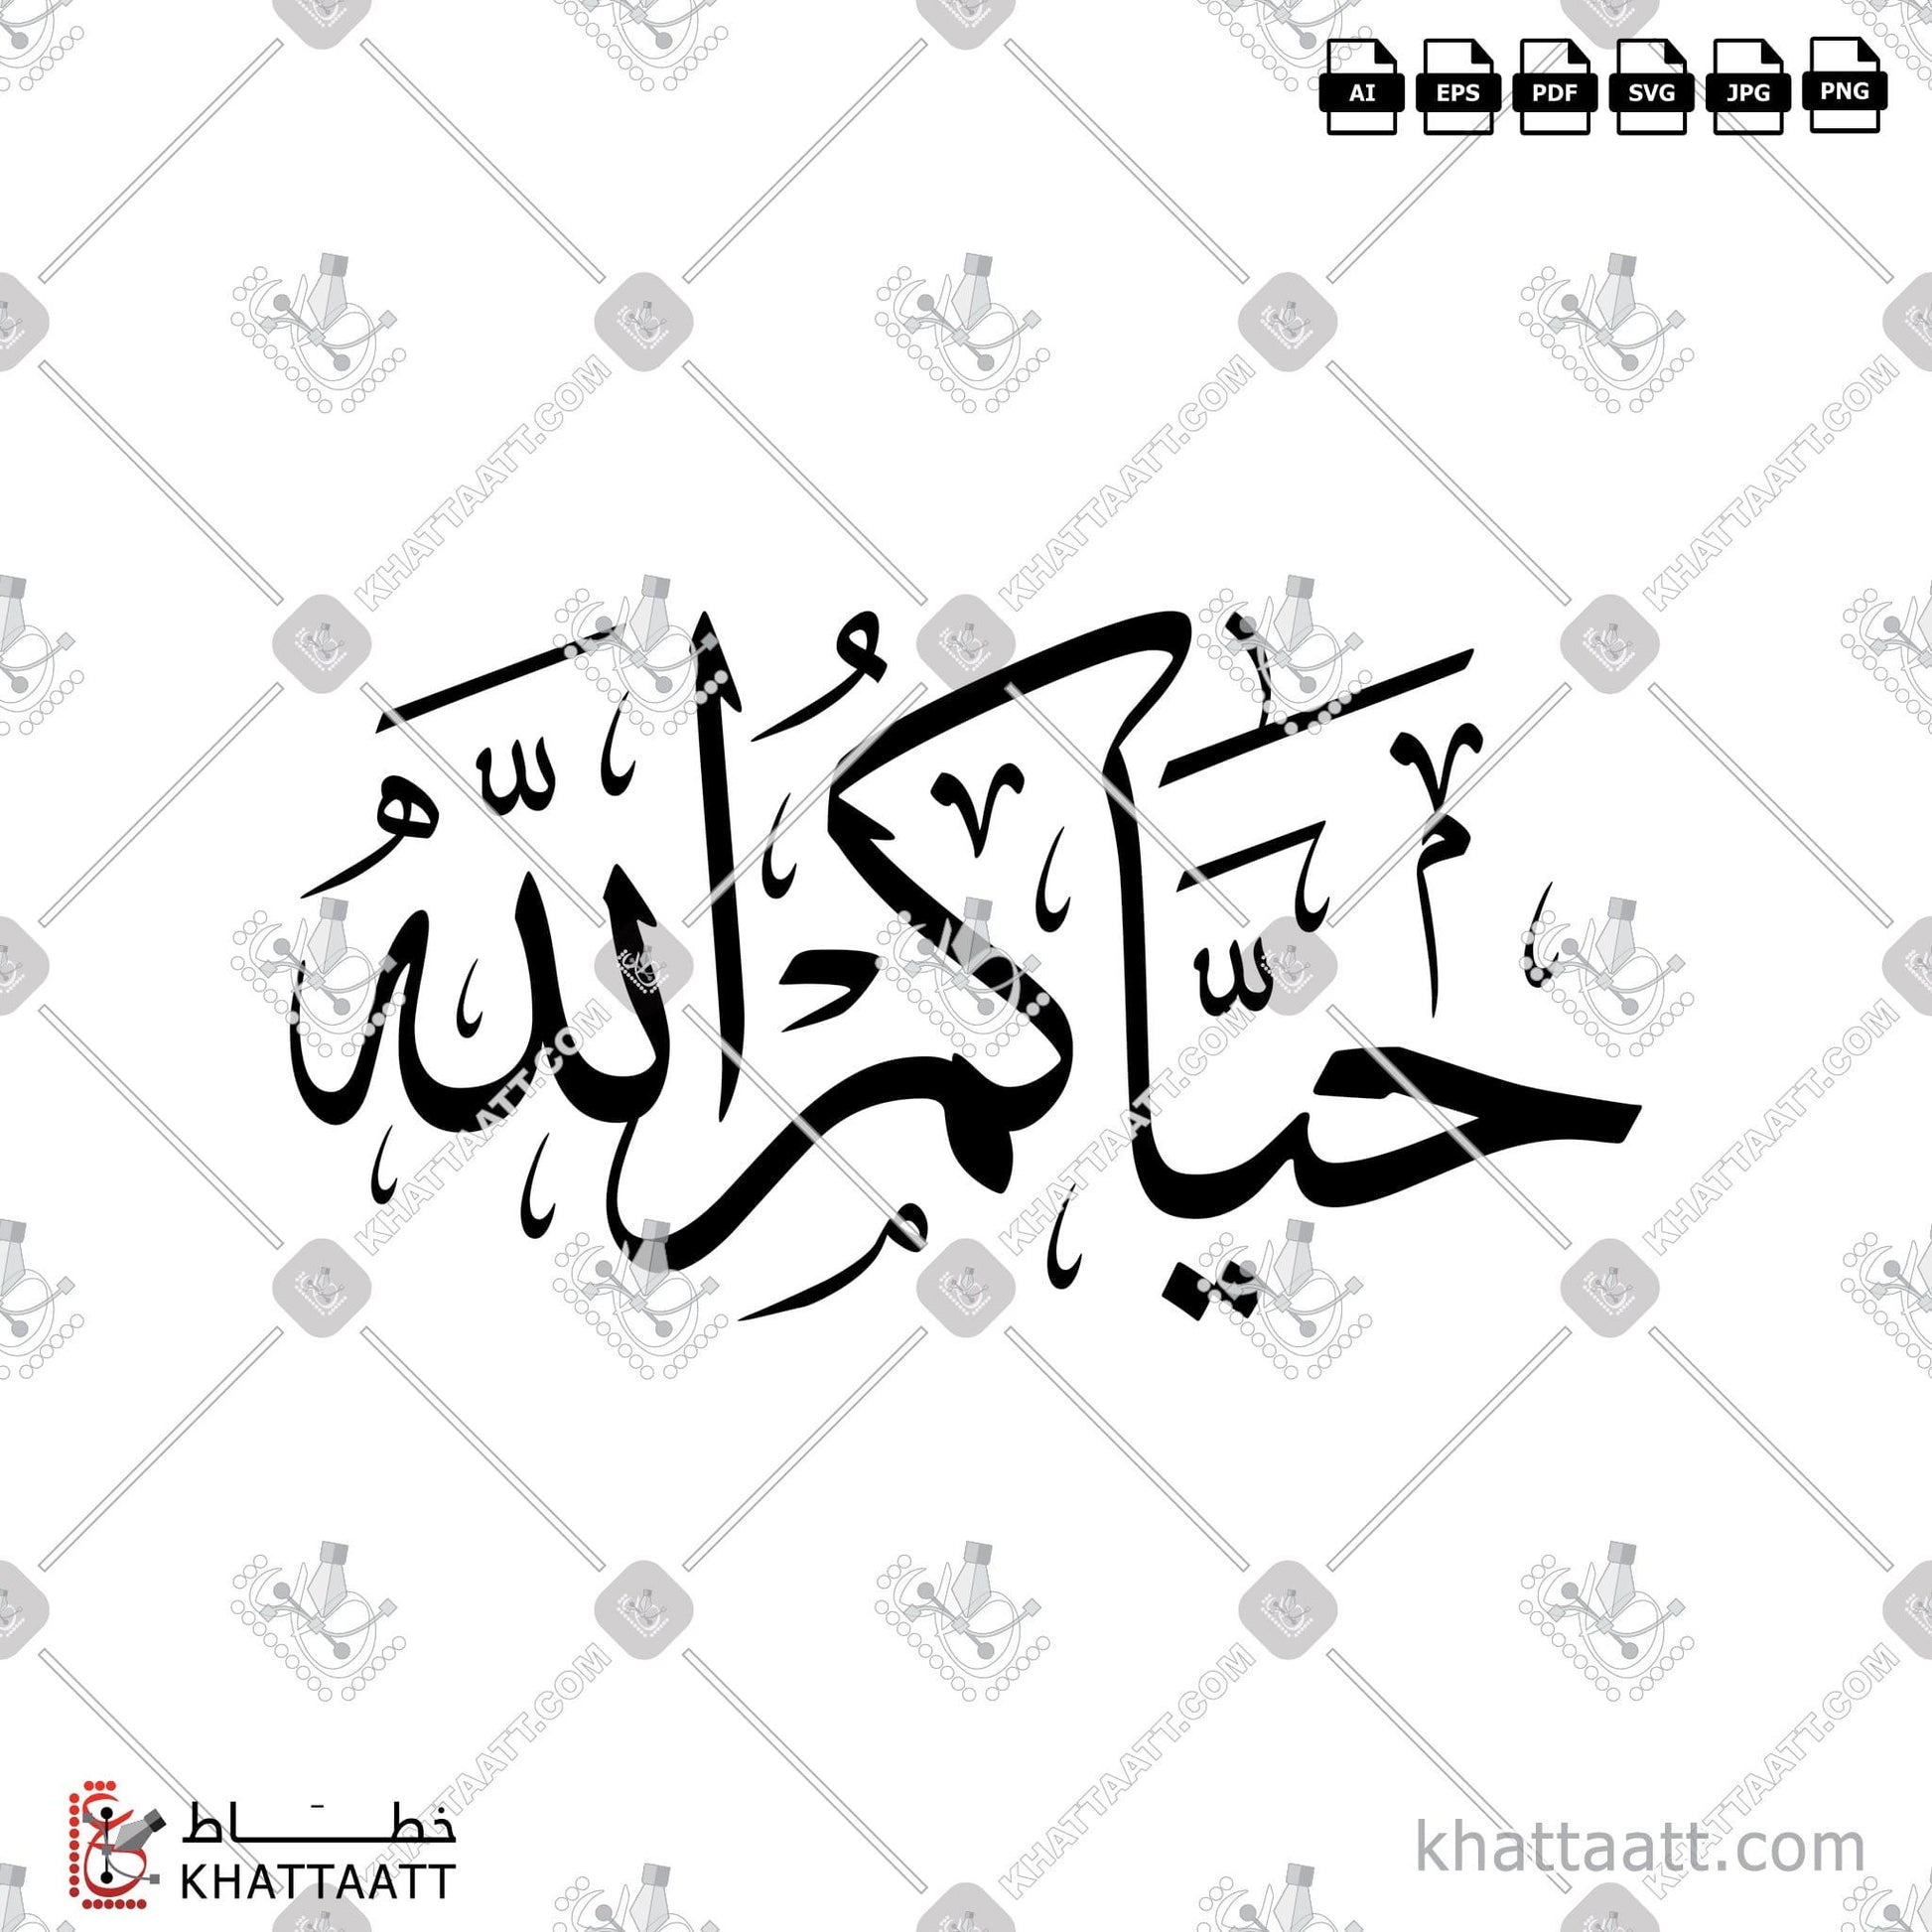 Download Arabic Calligraphy of حياكم الله in Thuluth - خط الثلث in vector and .png